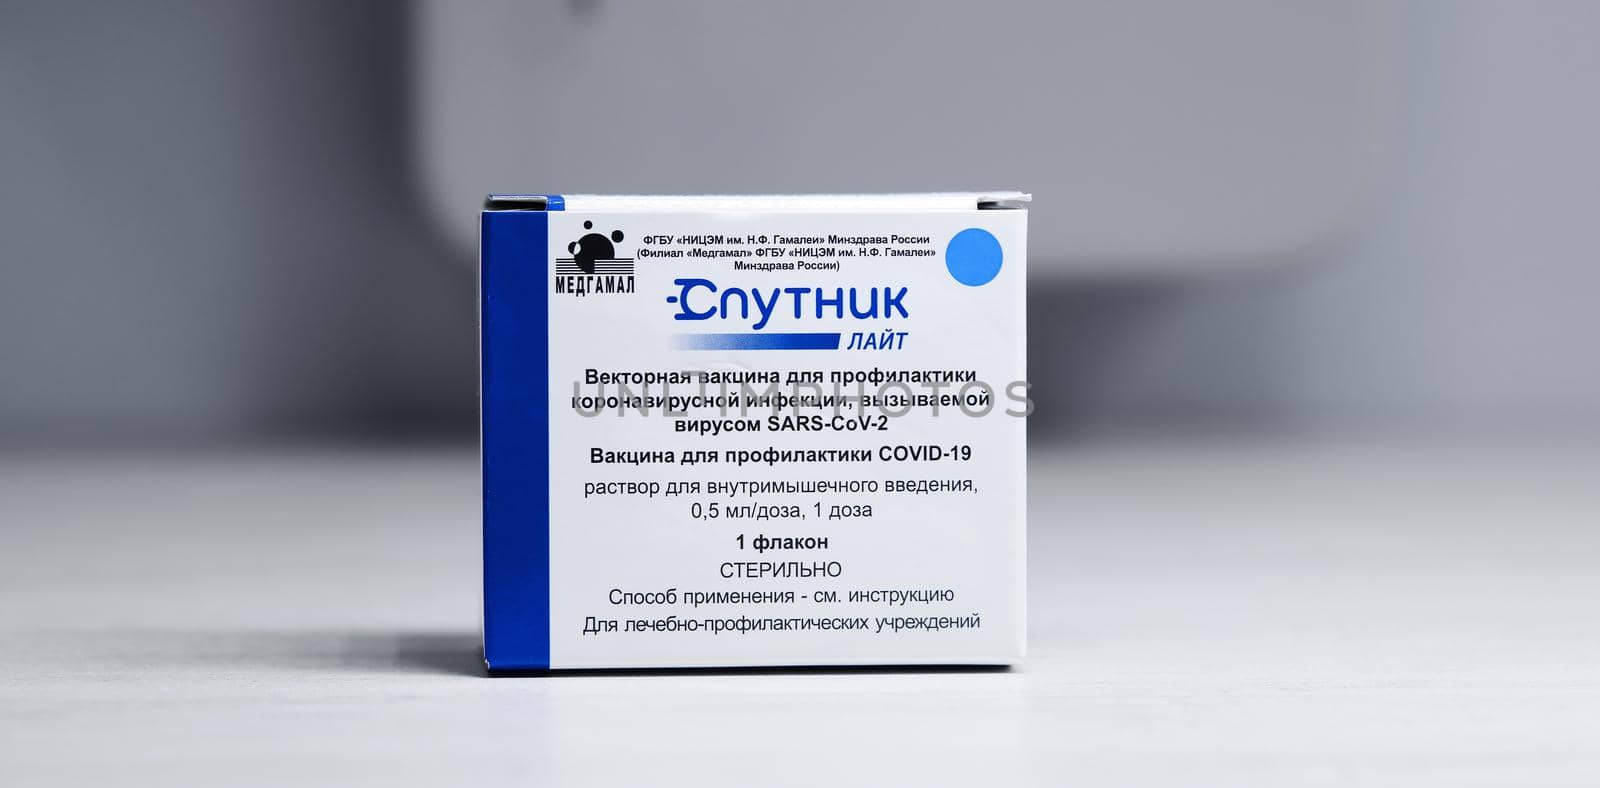 Box with new Russian vaccine against coronavirus SARS-CoV-2, Sputnik Lite. Vaccine for prevention COVID-19. 26.08.2021, Moscow, Russia by EvgeniyQW